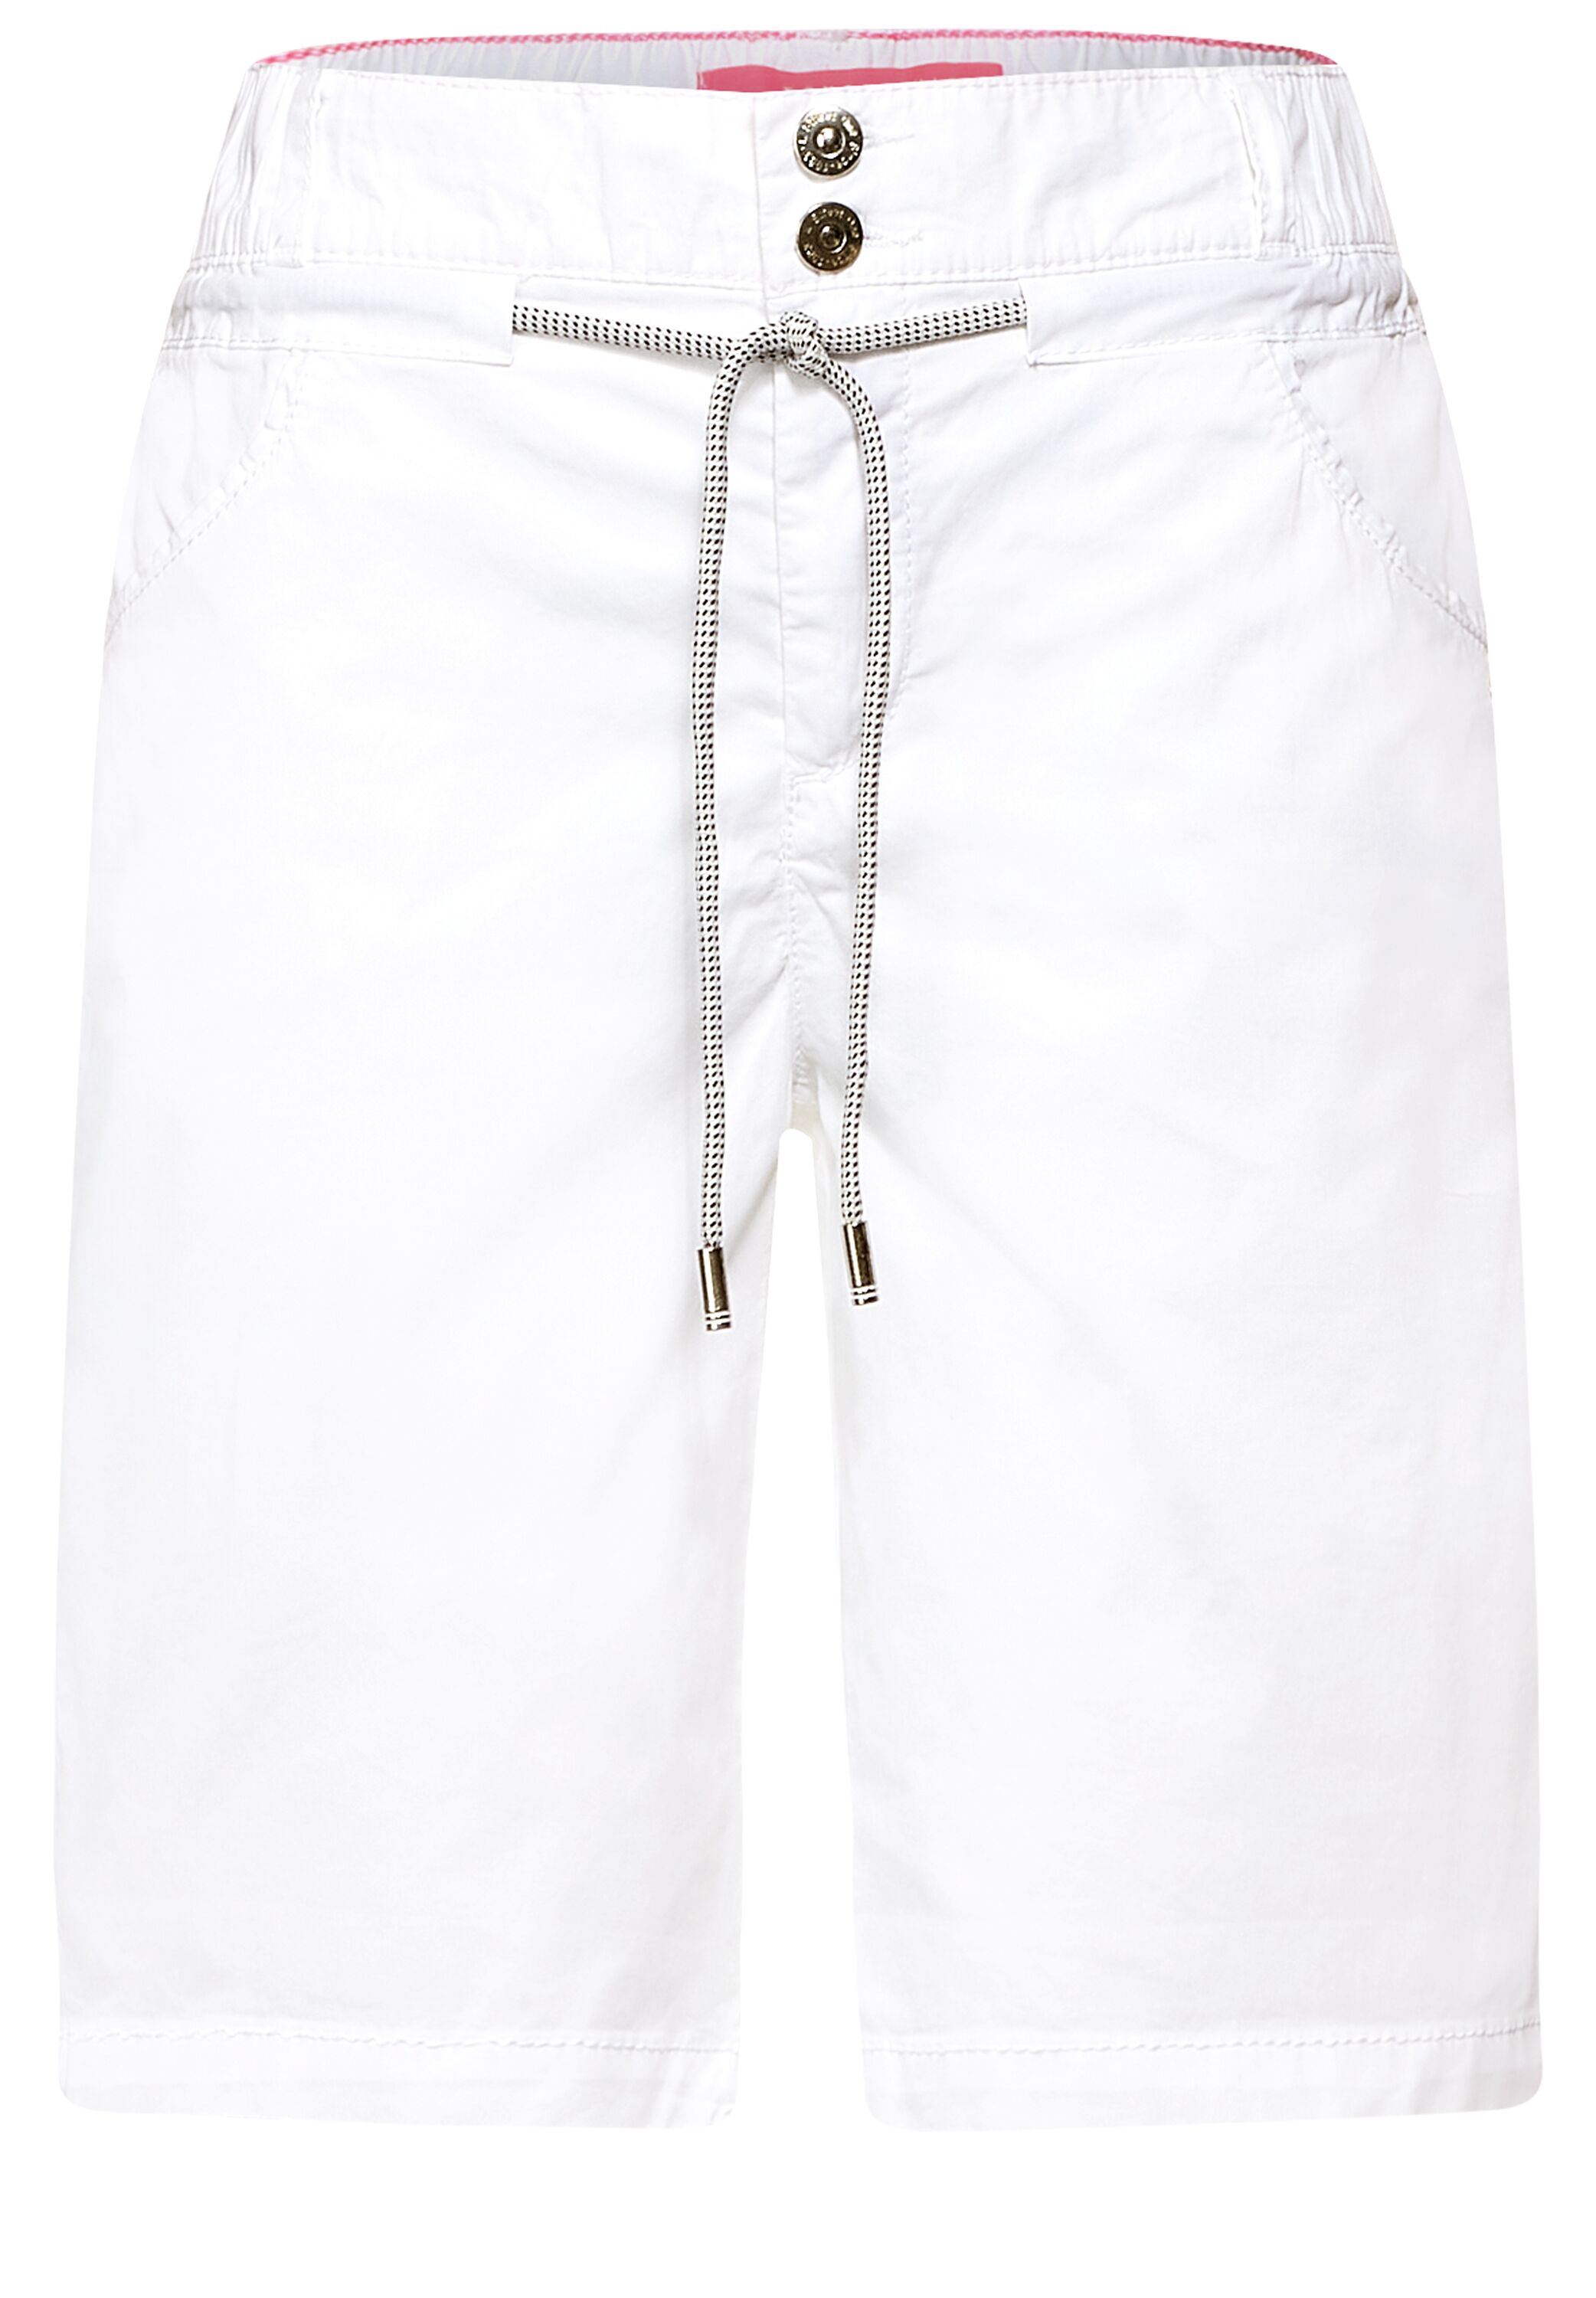 Shorts - SALE Mode CONCEPT Bonny White reduziert A374224-10000 Street im One in